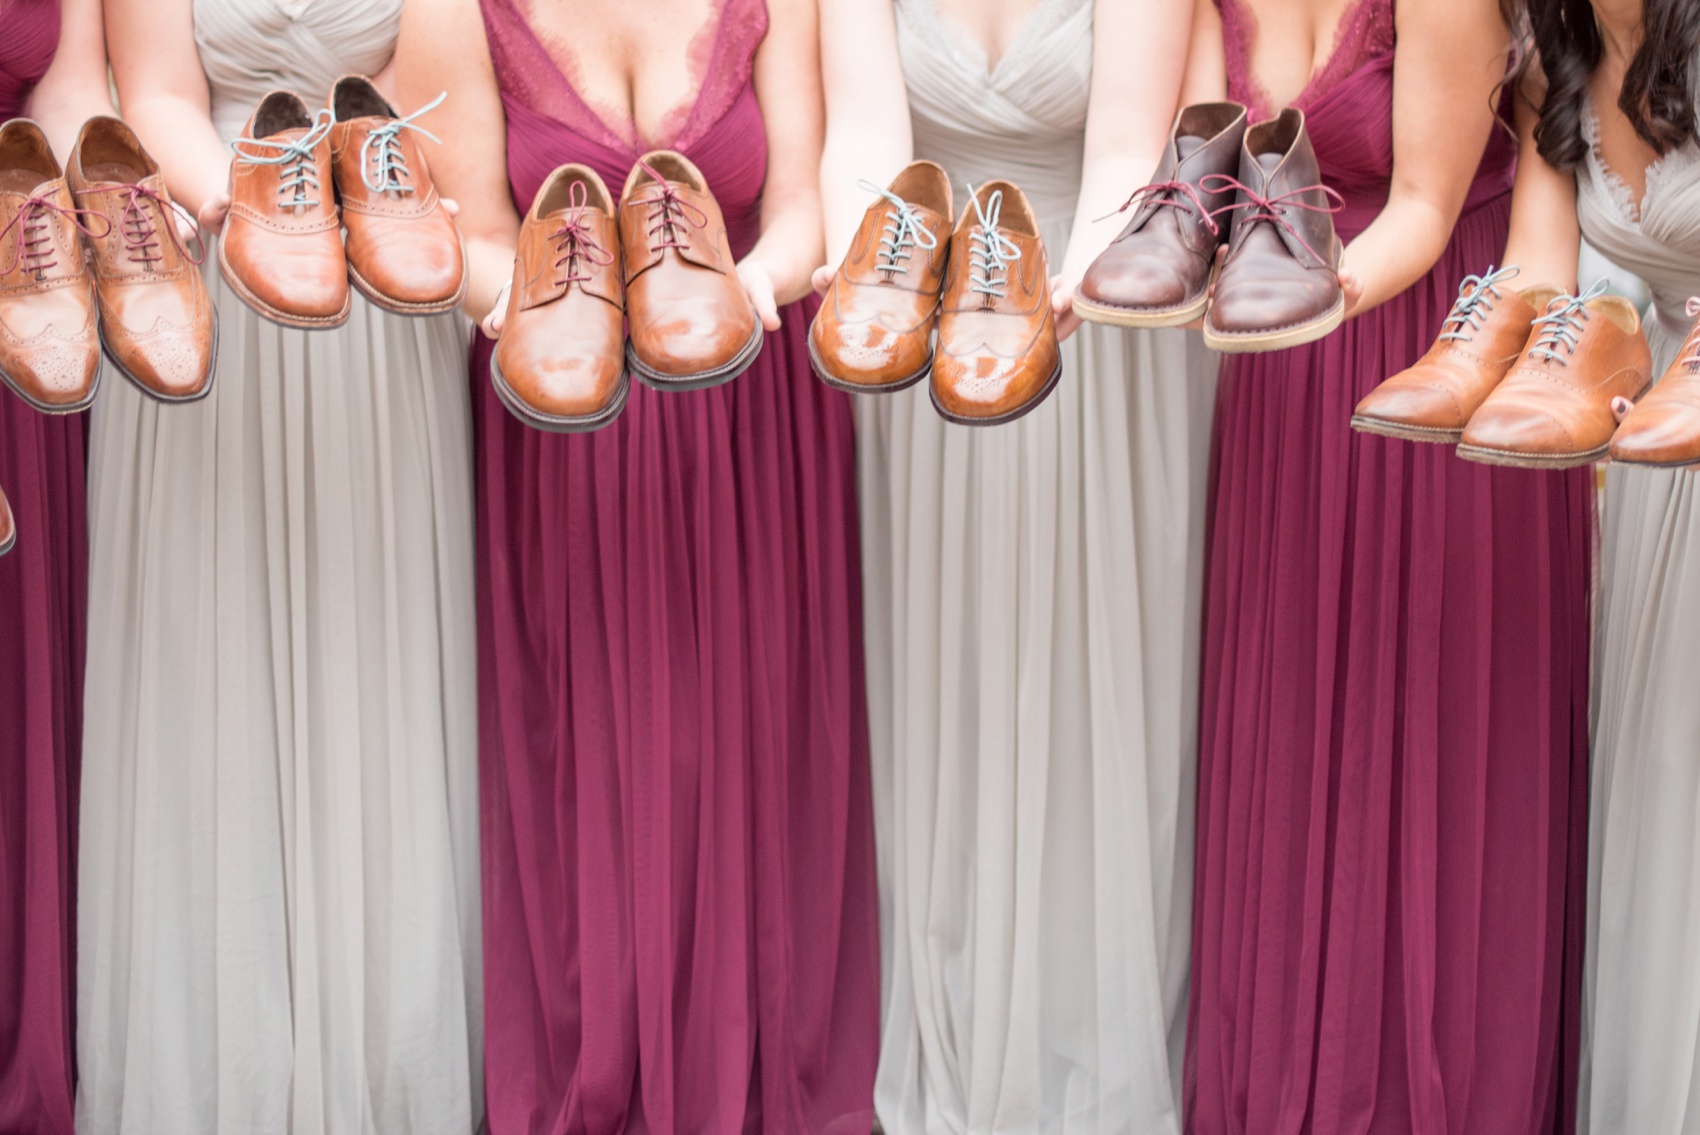 Bridesmaids gowns photo with matching groomsmen shoe laces in burgundy, blush and grey by Mikkel Paige Photography, NYC and Raleigh wedding photographer. Wedding at The Olde Mill Inn in New Jersey.